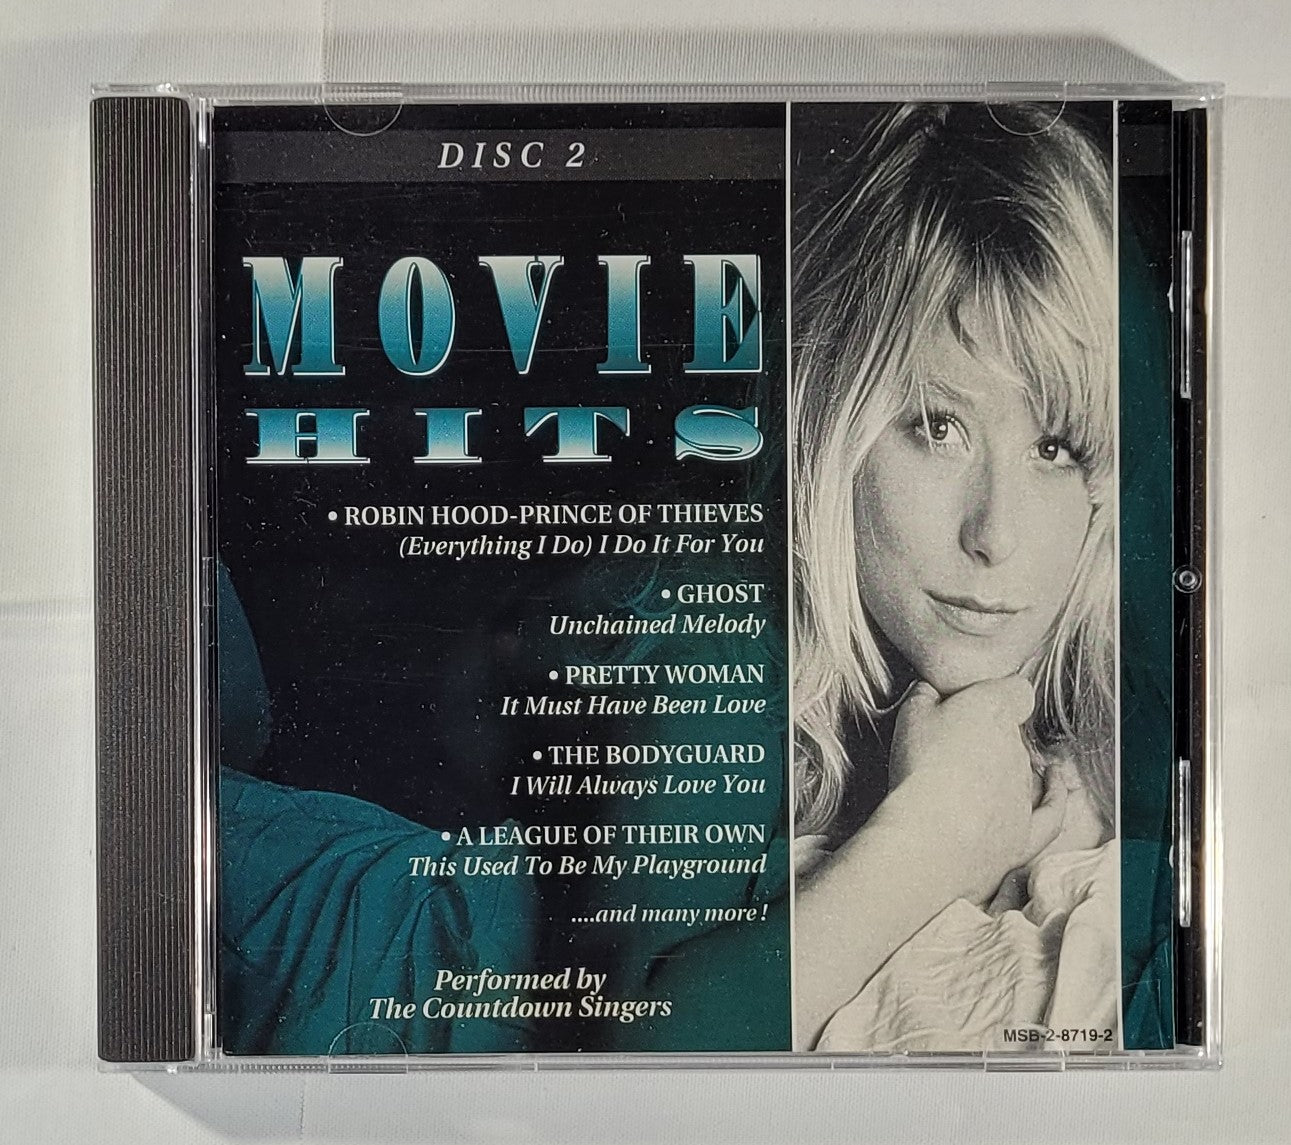 The Countdown Singers - Movie Hits [1994 Used Double CD]